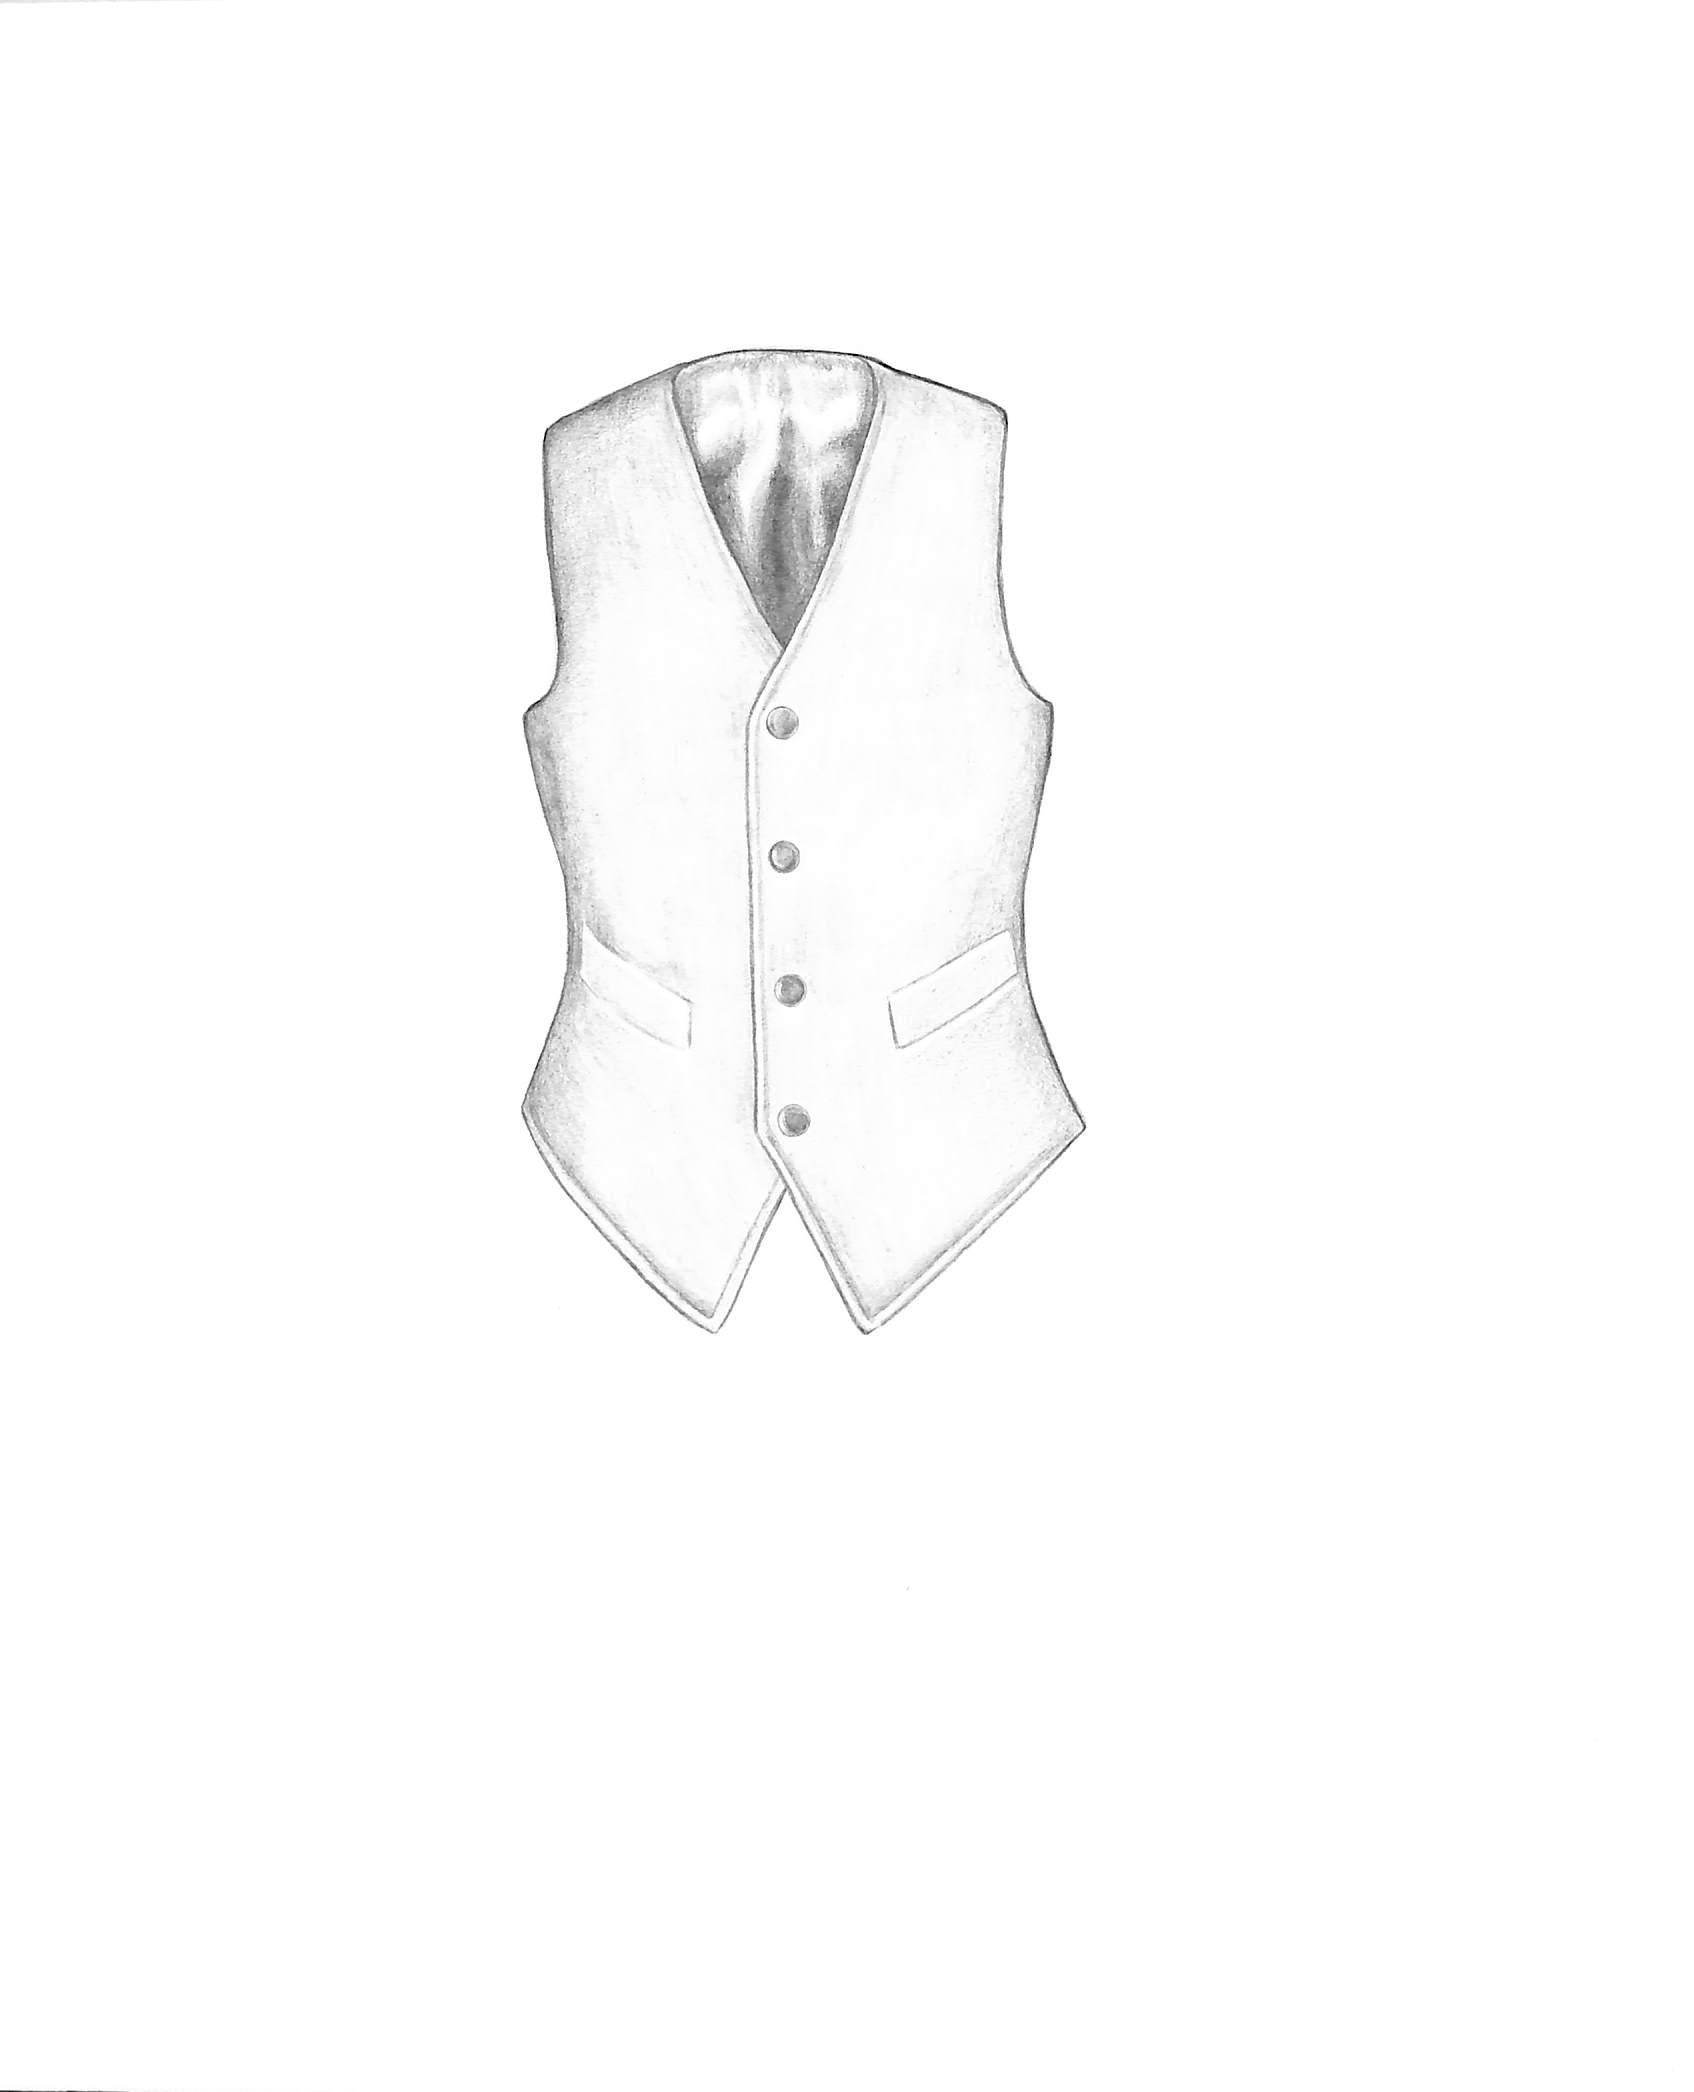 DNU Waistcoat Graphite Drawing - Art by Unknown